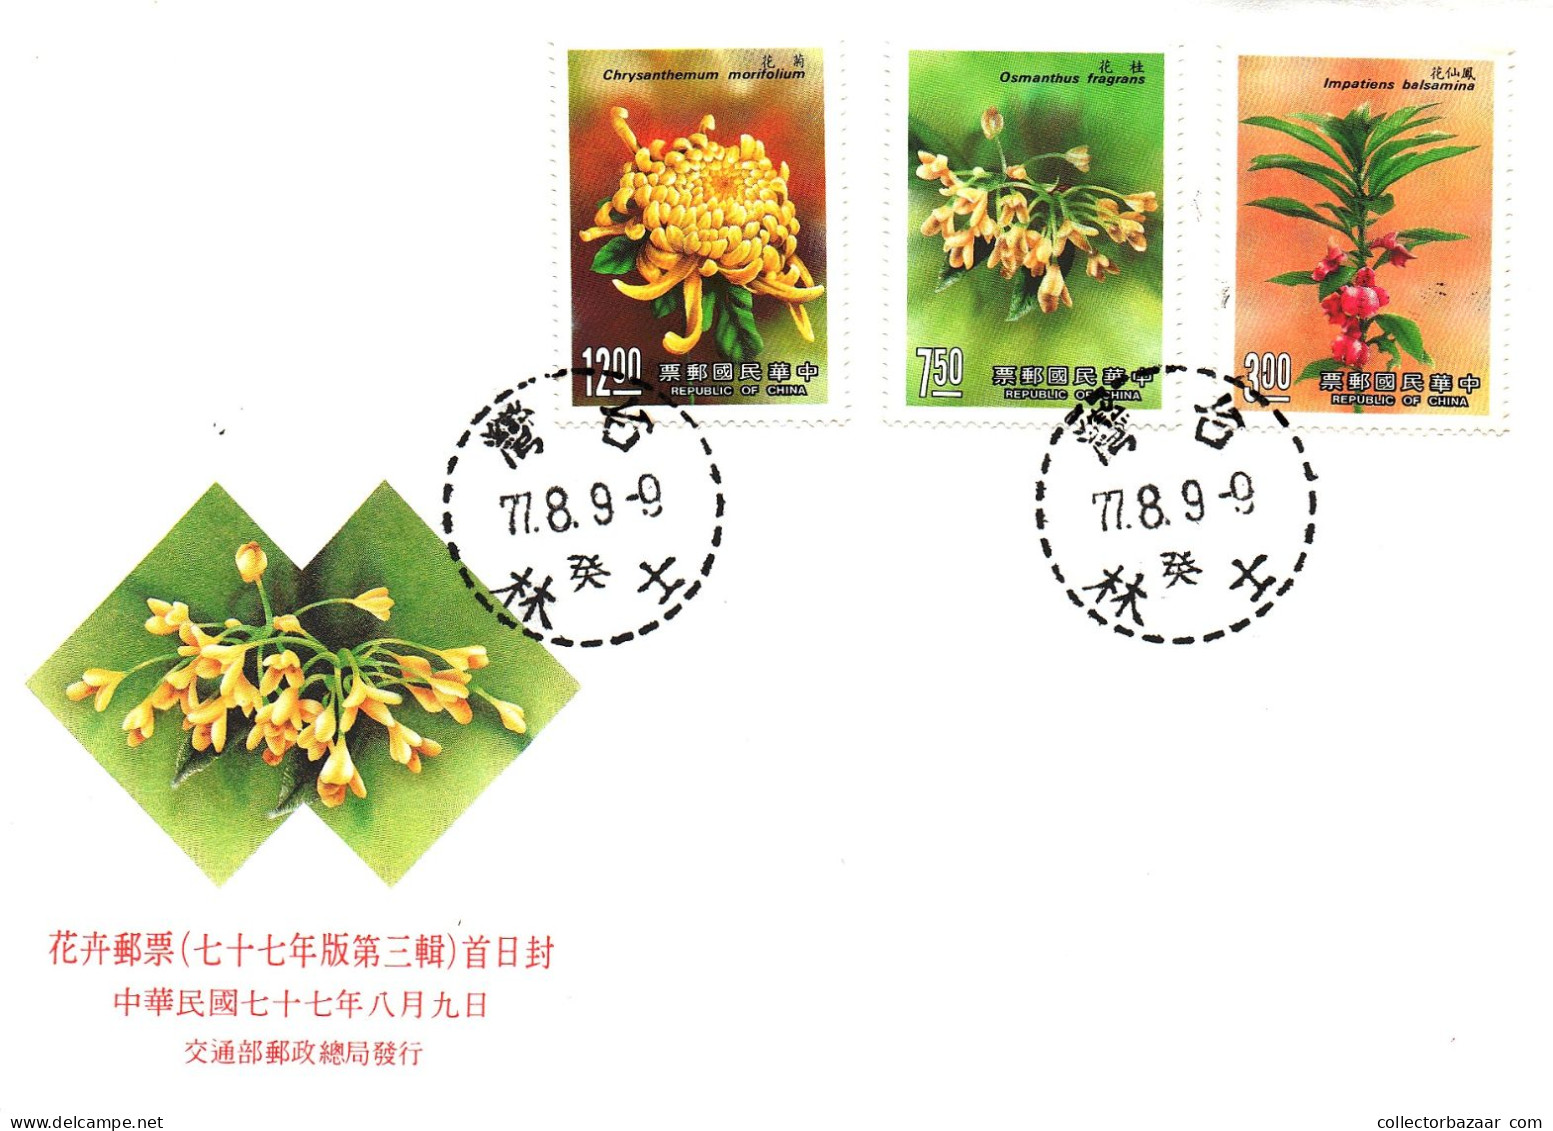 Taiwan Formosa Republic Of China FDC  -  colourful flowers nature environment Stamps